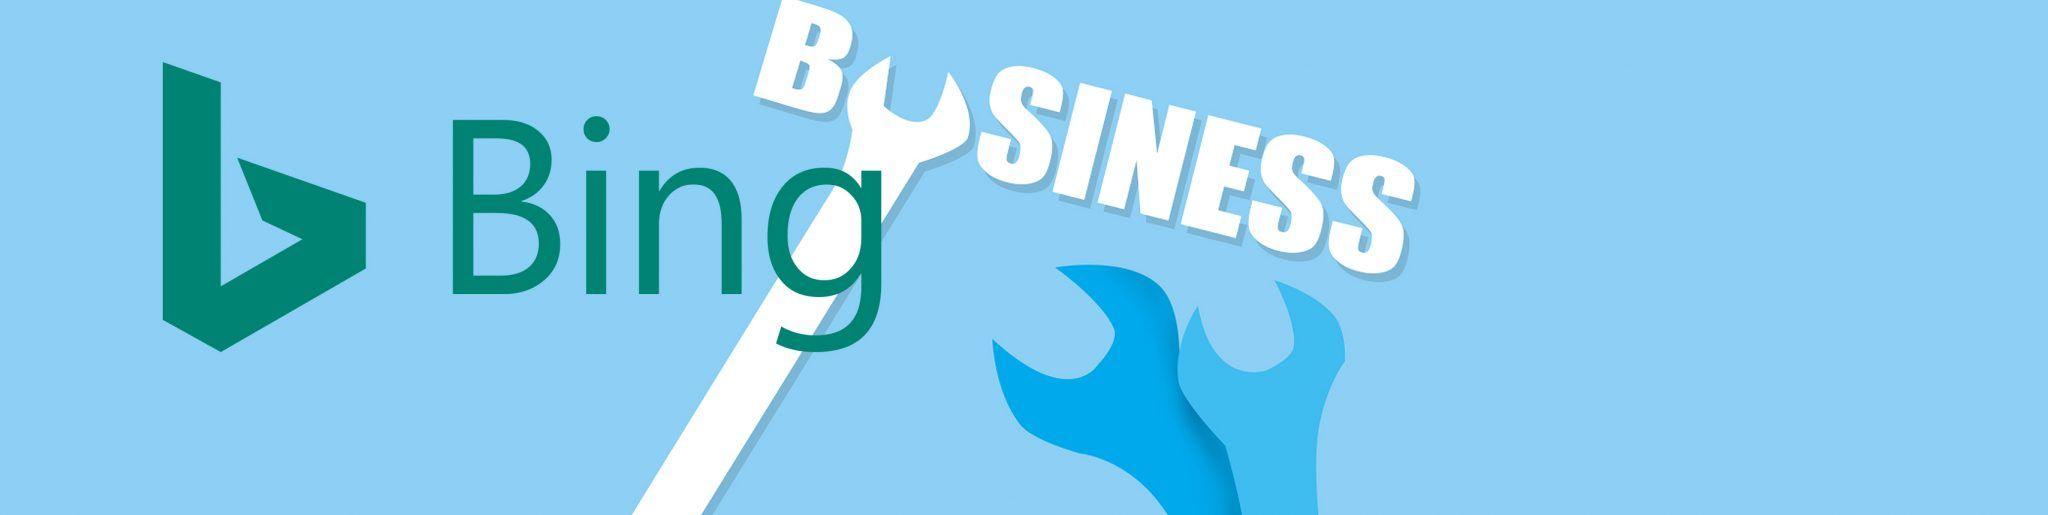 Bing Business Logo - Bing for Business: Is this the future — or the past?